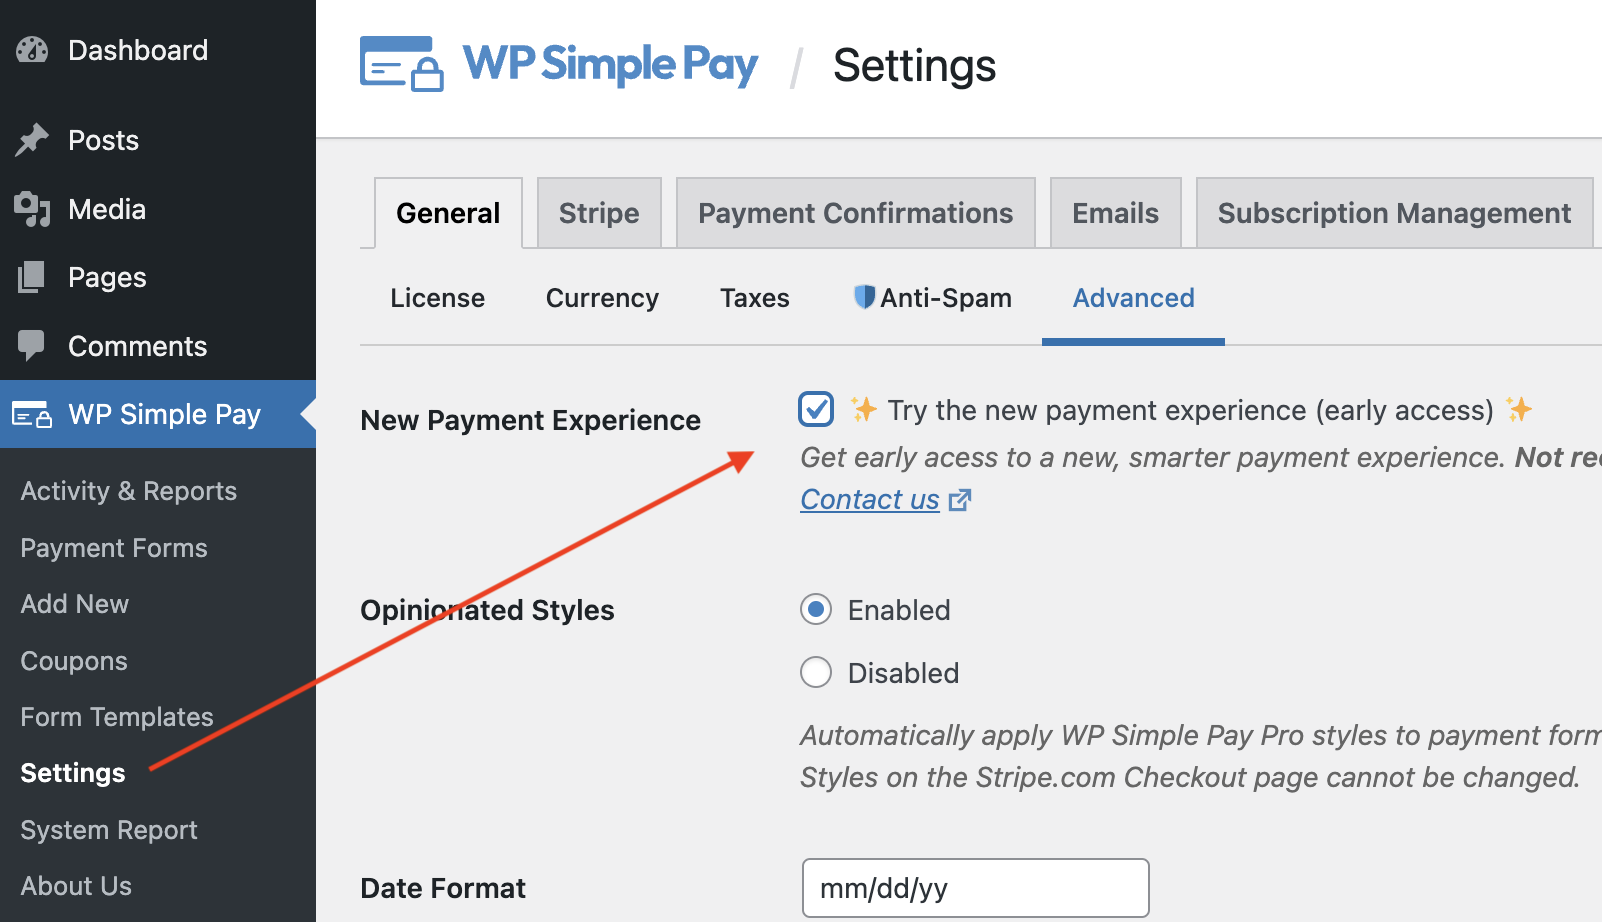 WP Simple Pay enable new payment experience